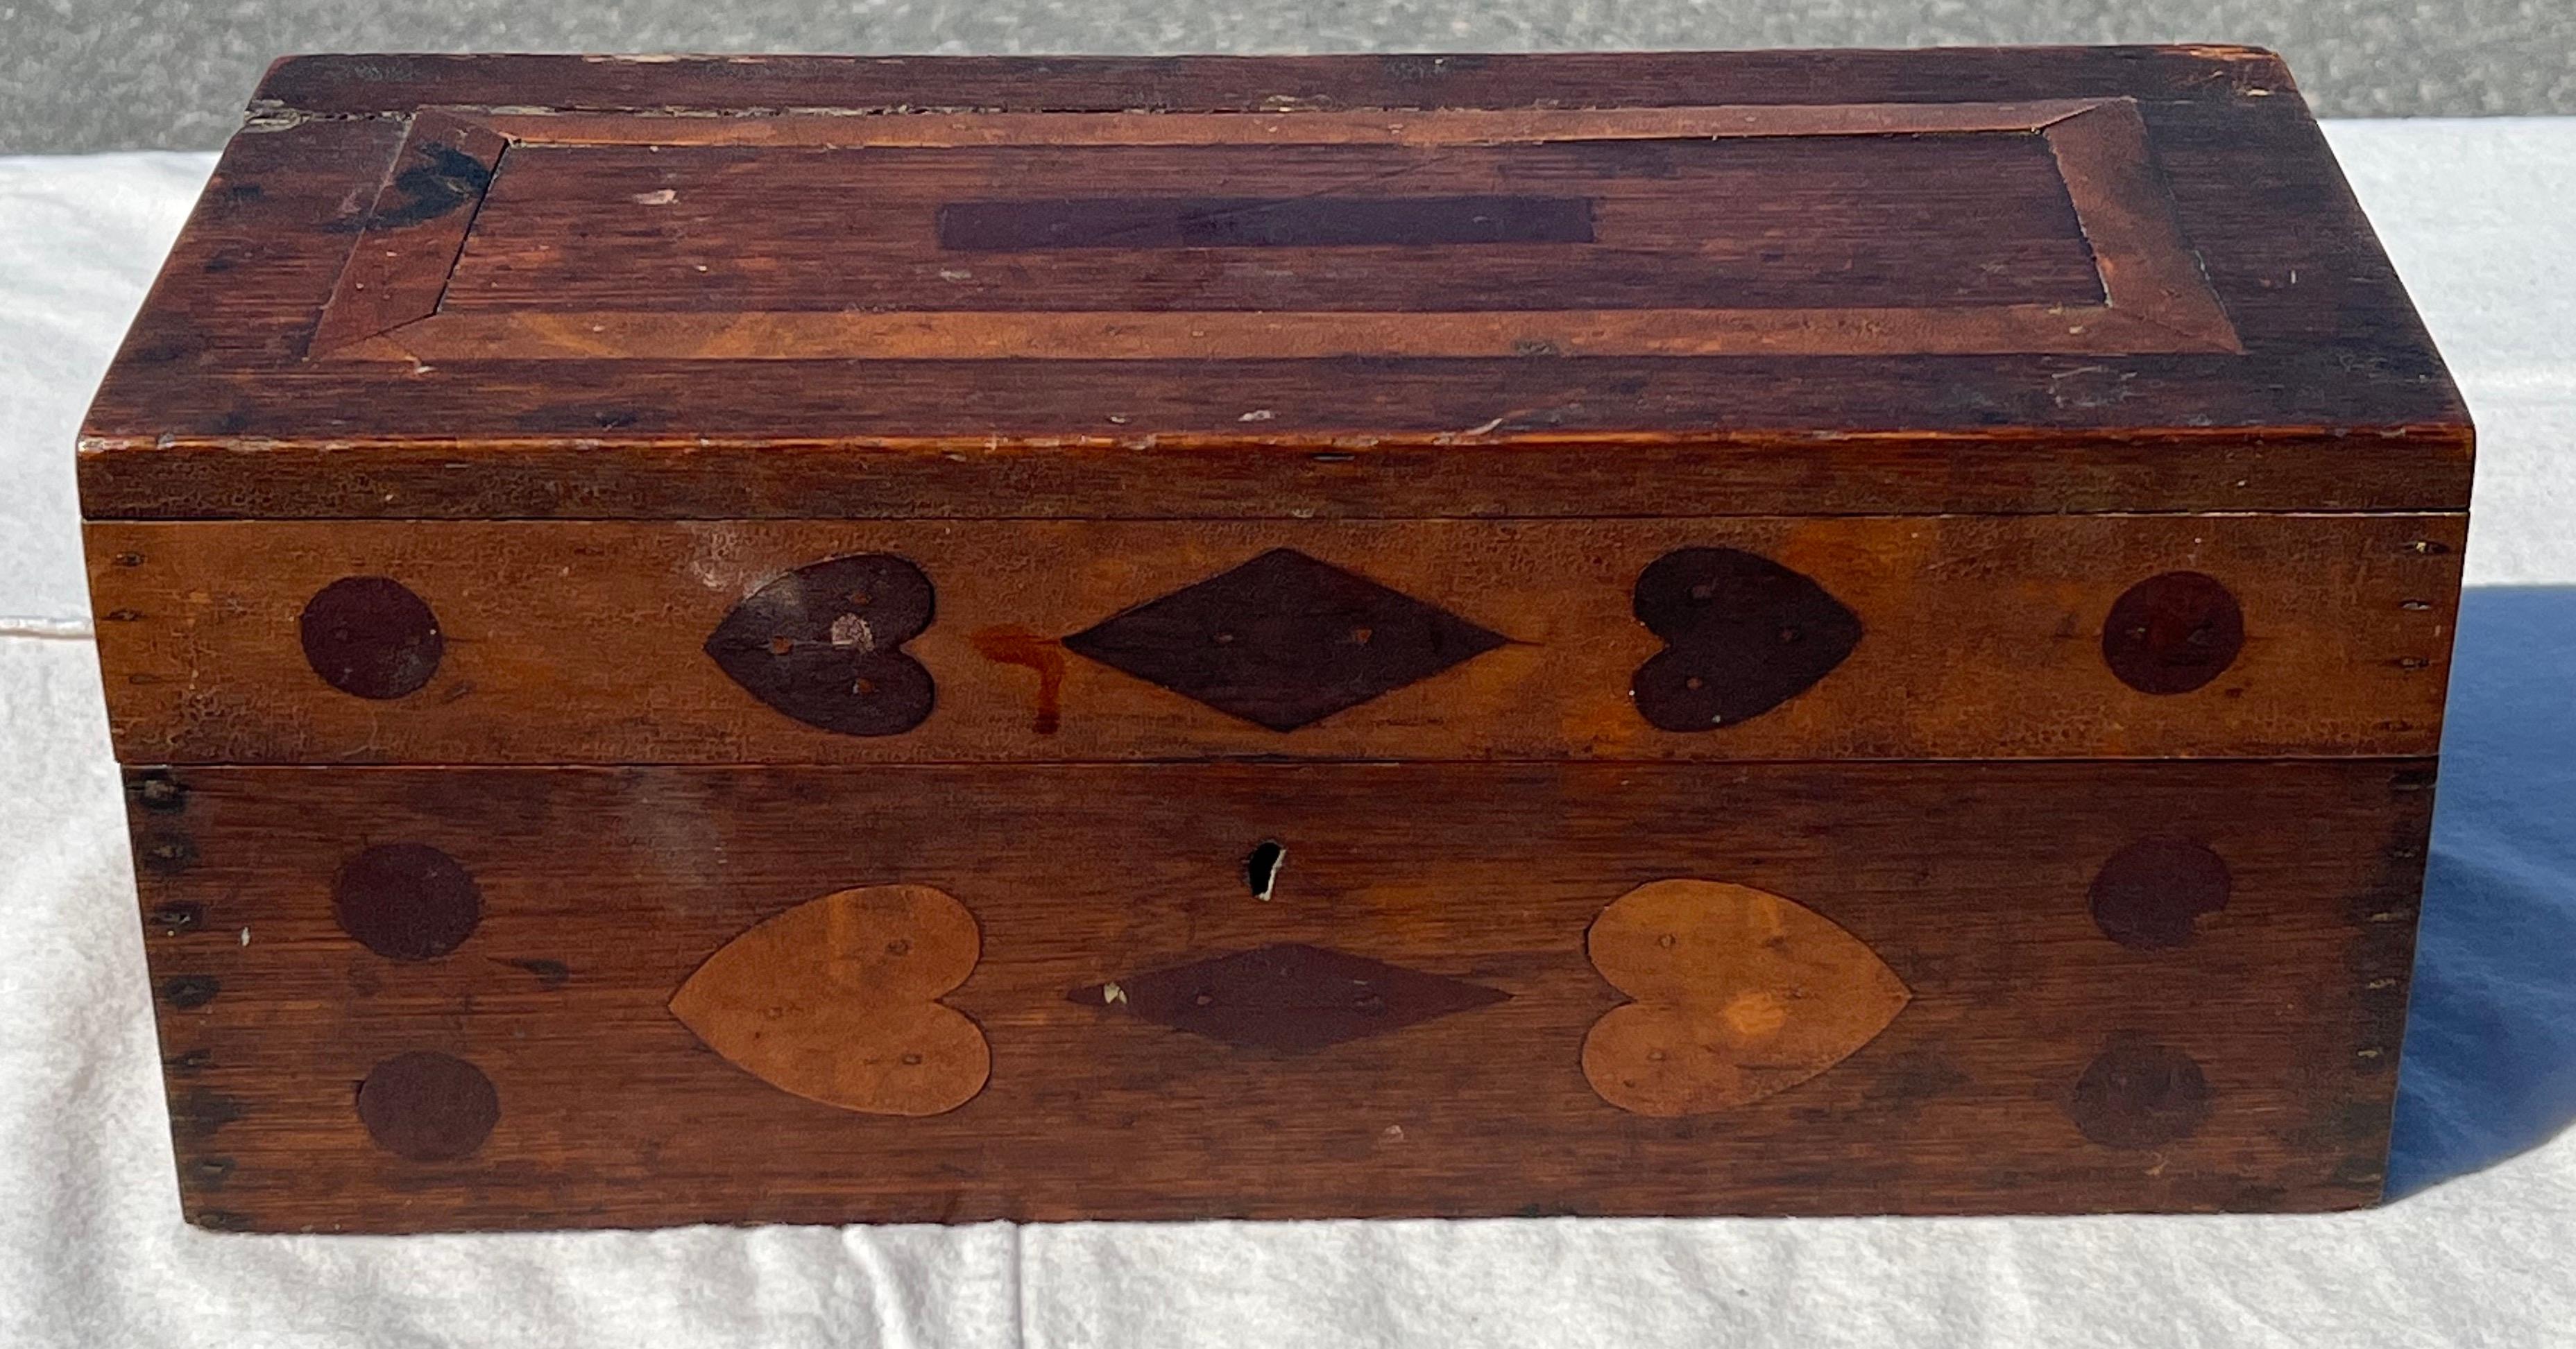 19th Century Wooden Box with Inlaid Decoration In Good Condition For Sale In Nantucket, MA